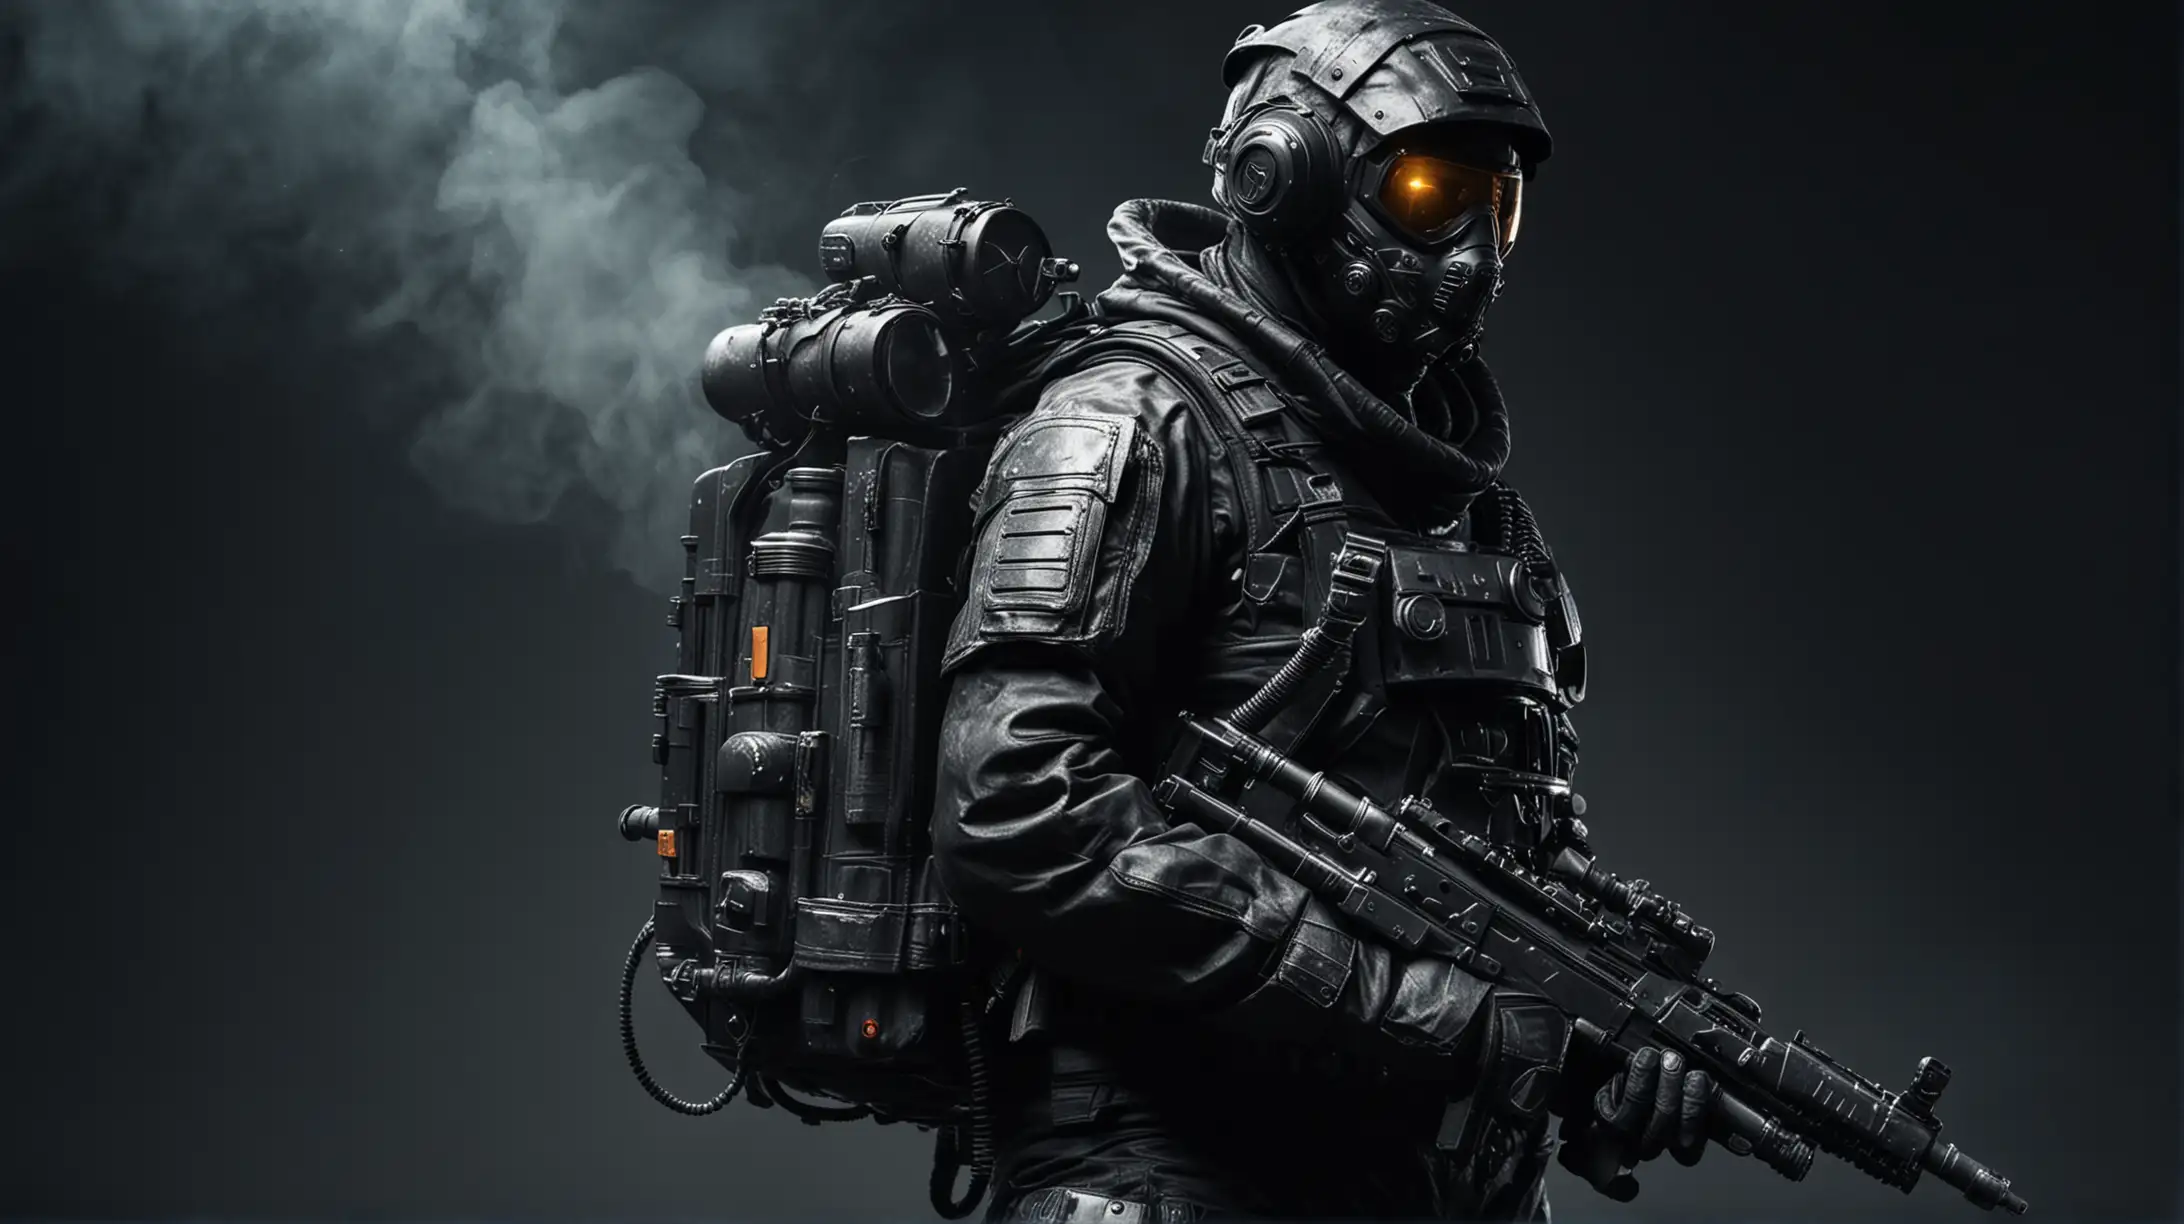 SciFi Soldier in Sealed Environment Suit with Autogun